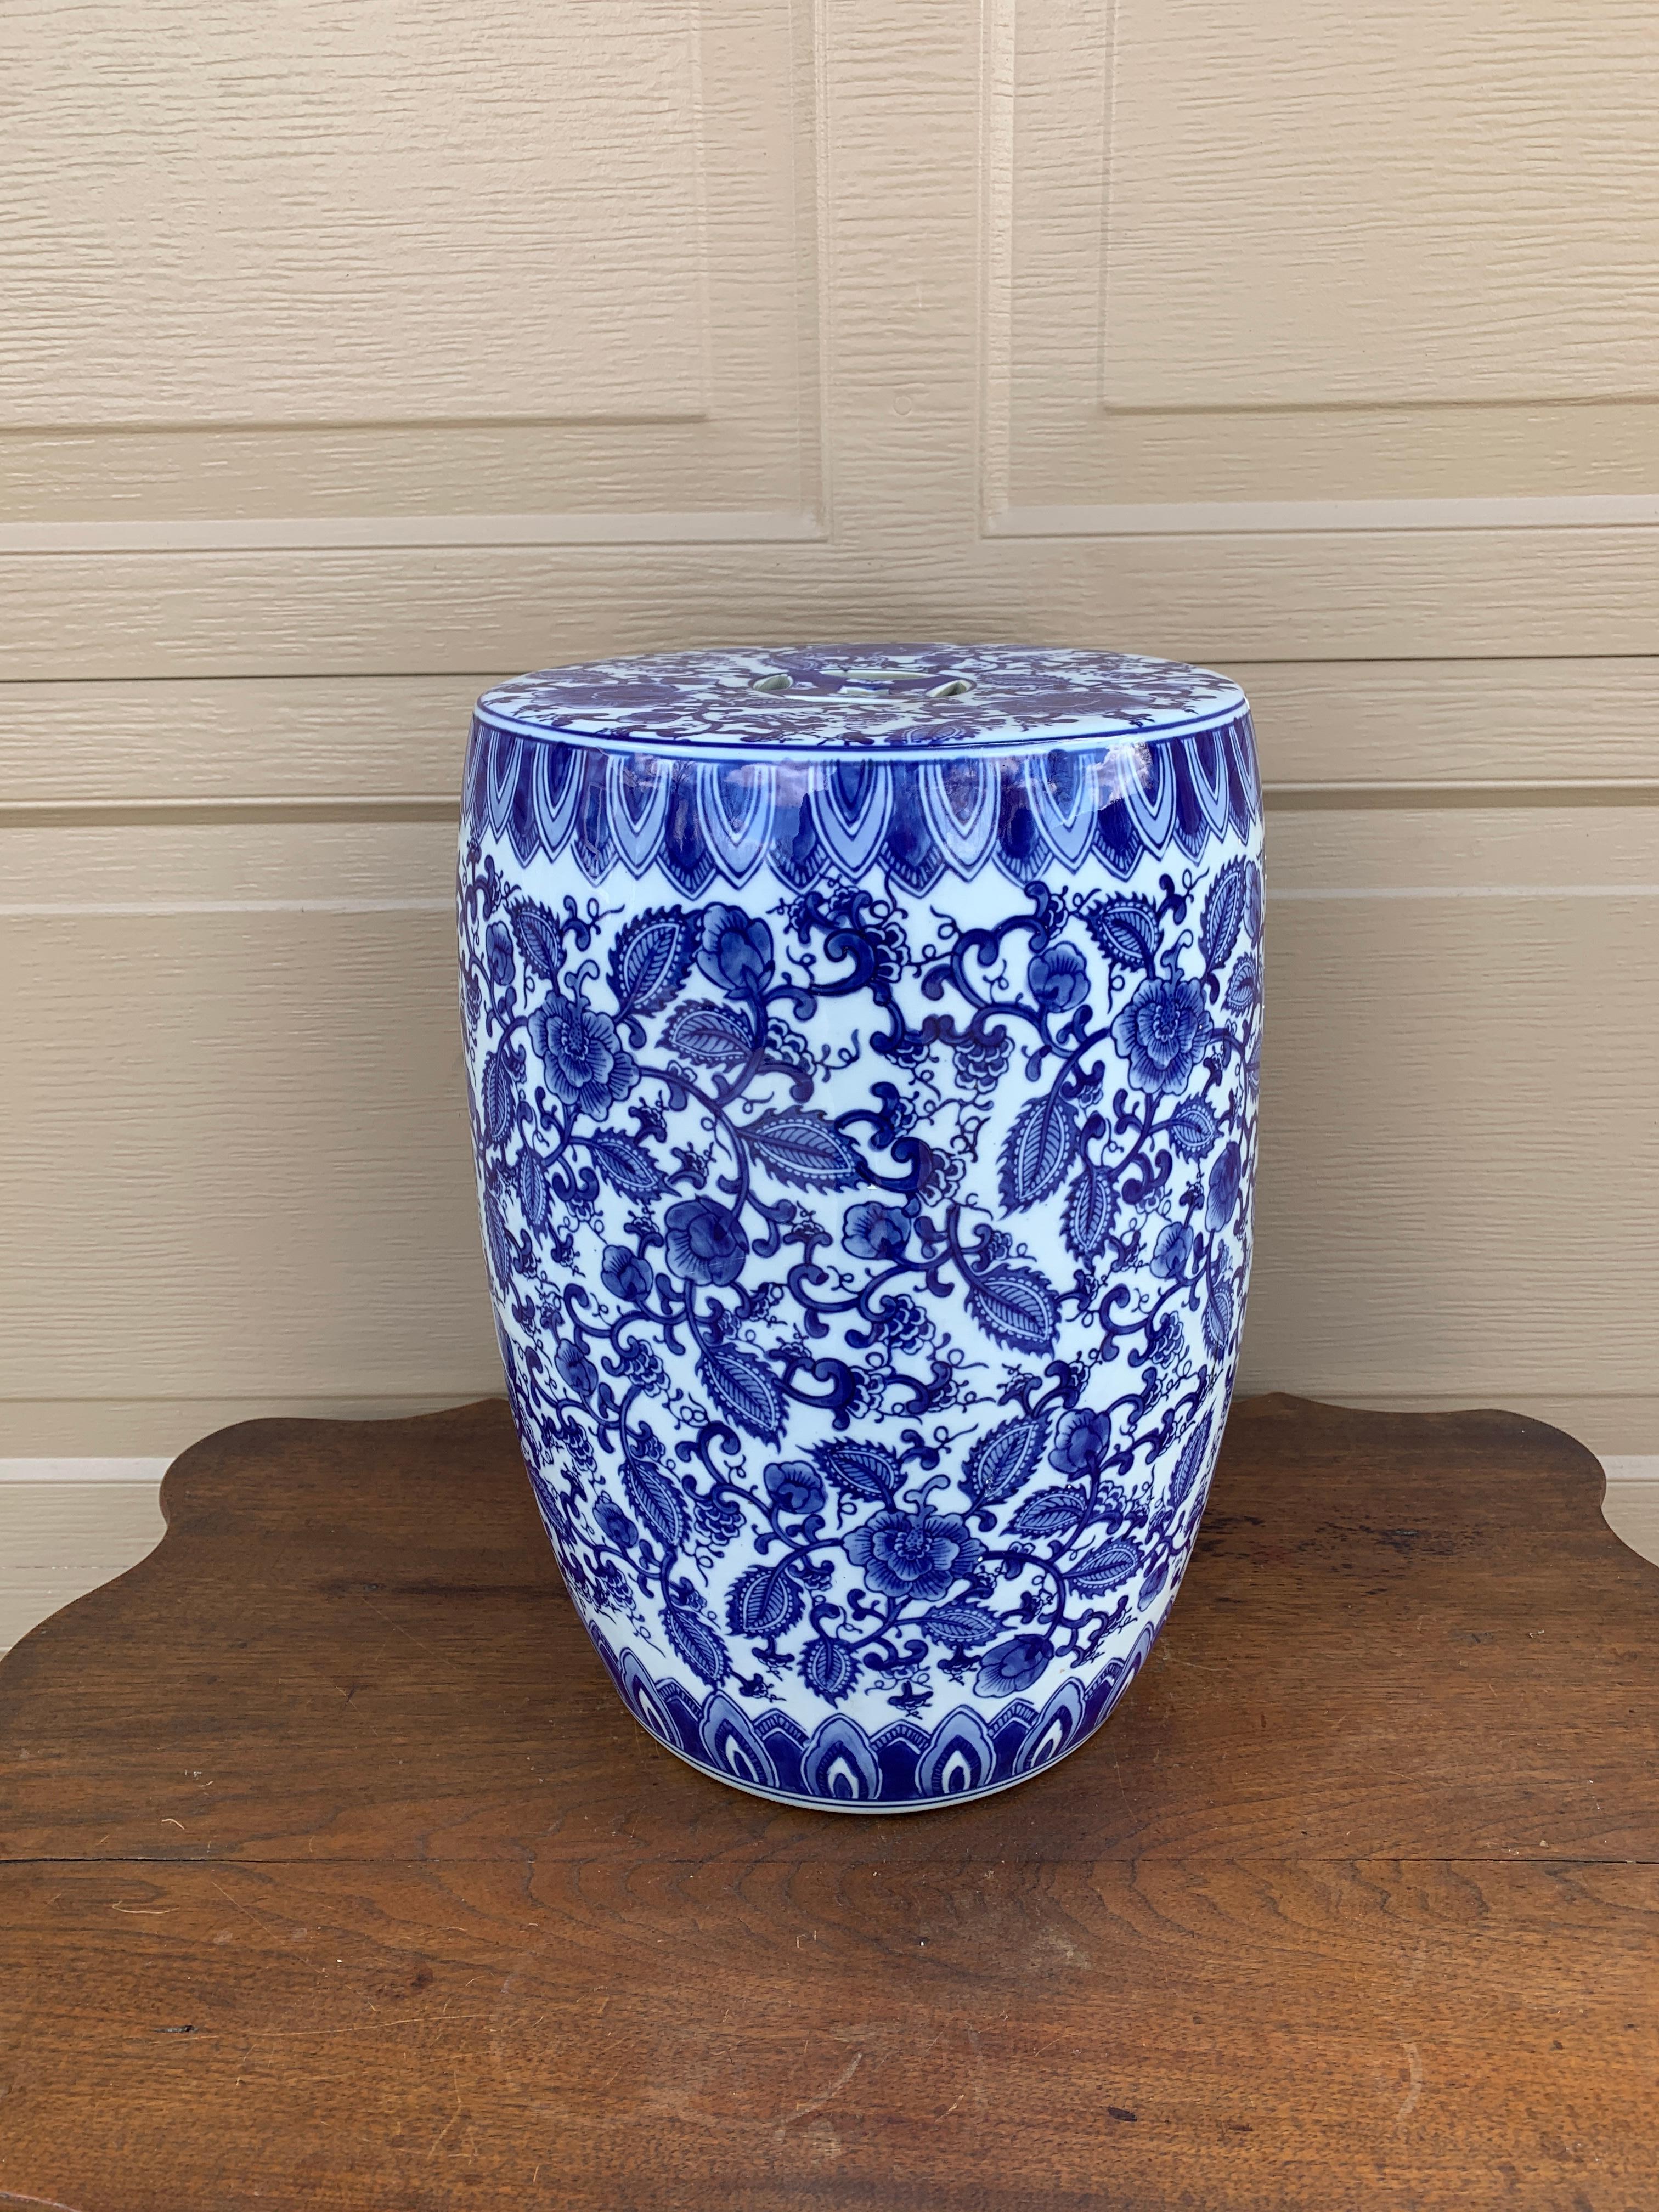 Chinoiserie Blue and White Porcelain Garden Stool For Sale 2